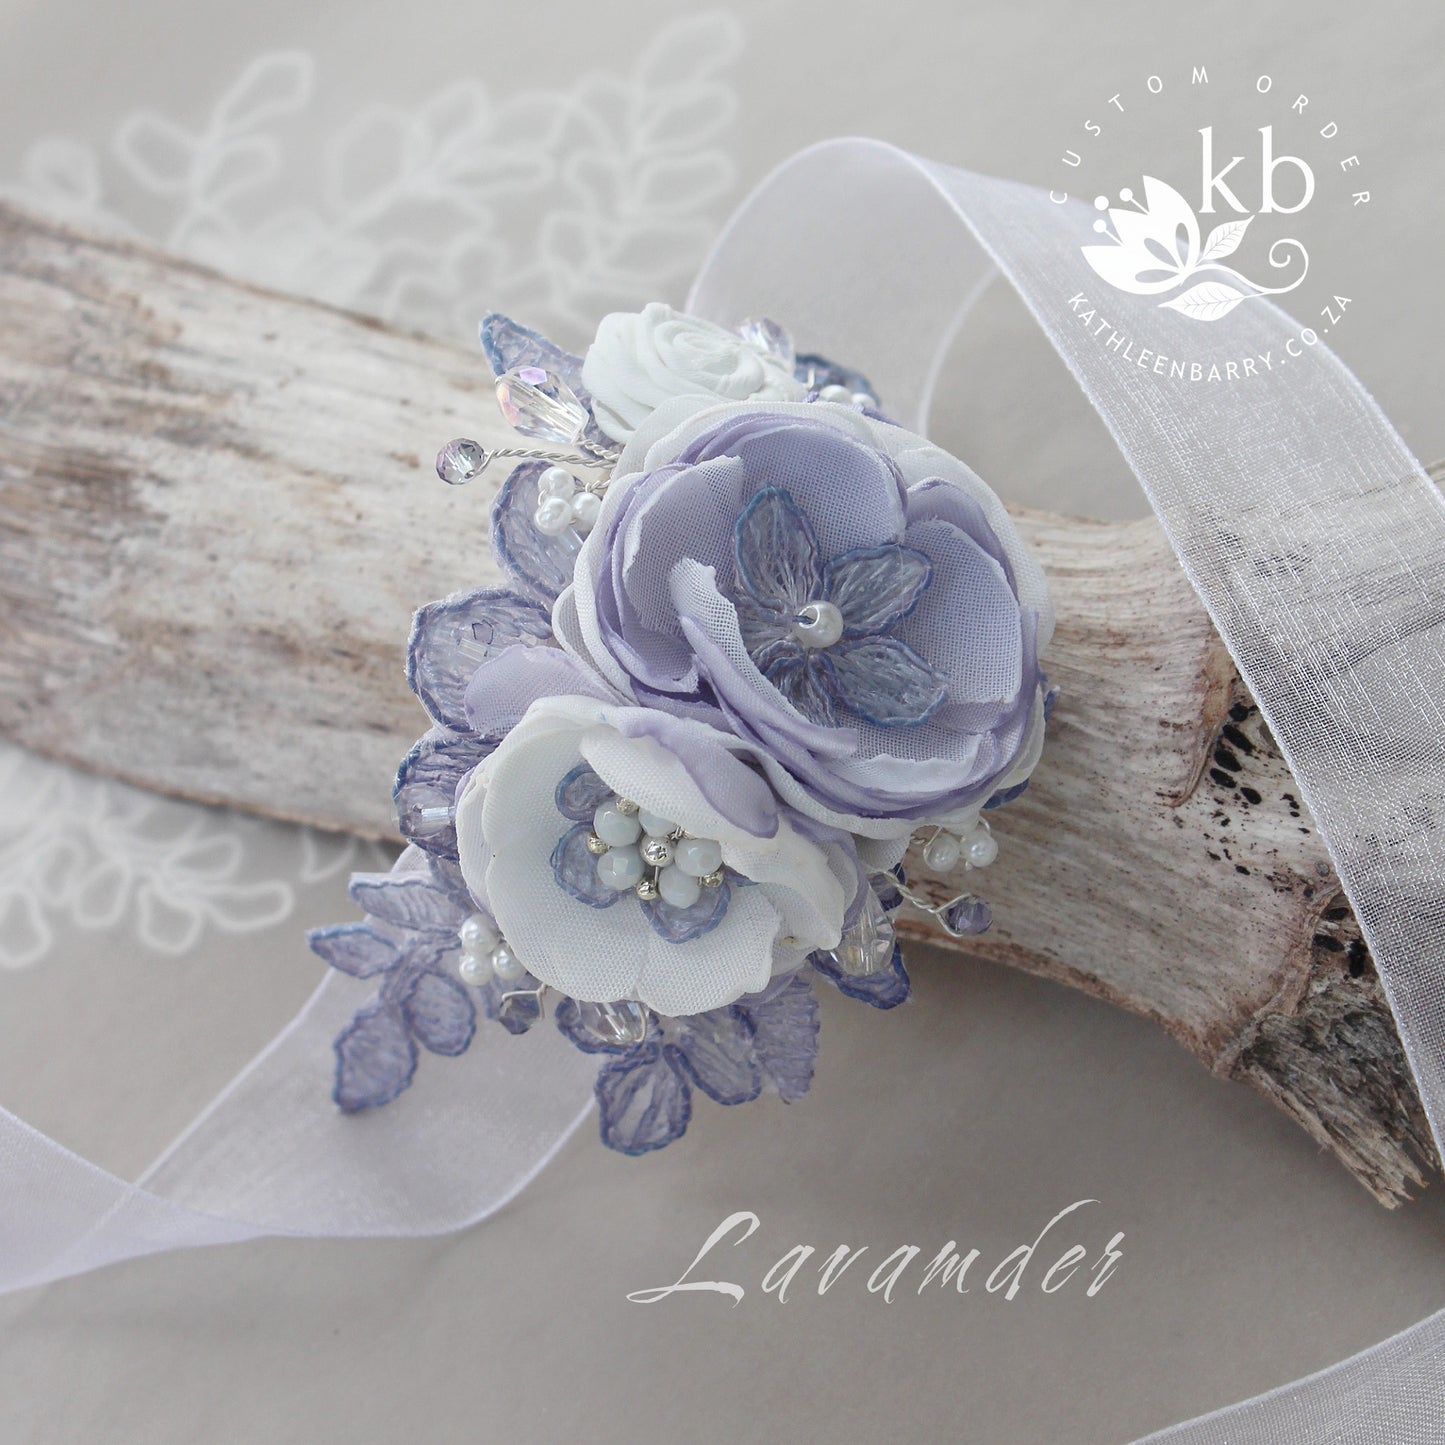 Erin Everlasting Lace wrist corsage - Custom colors to order